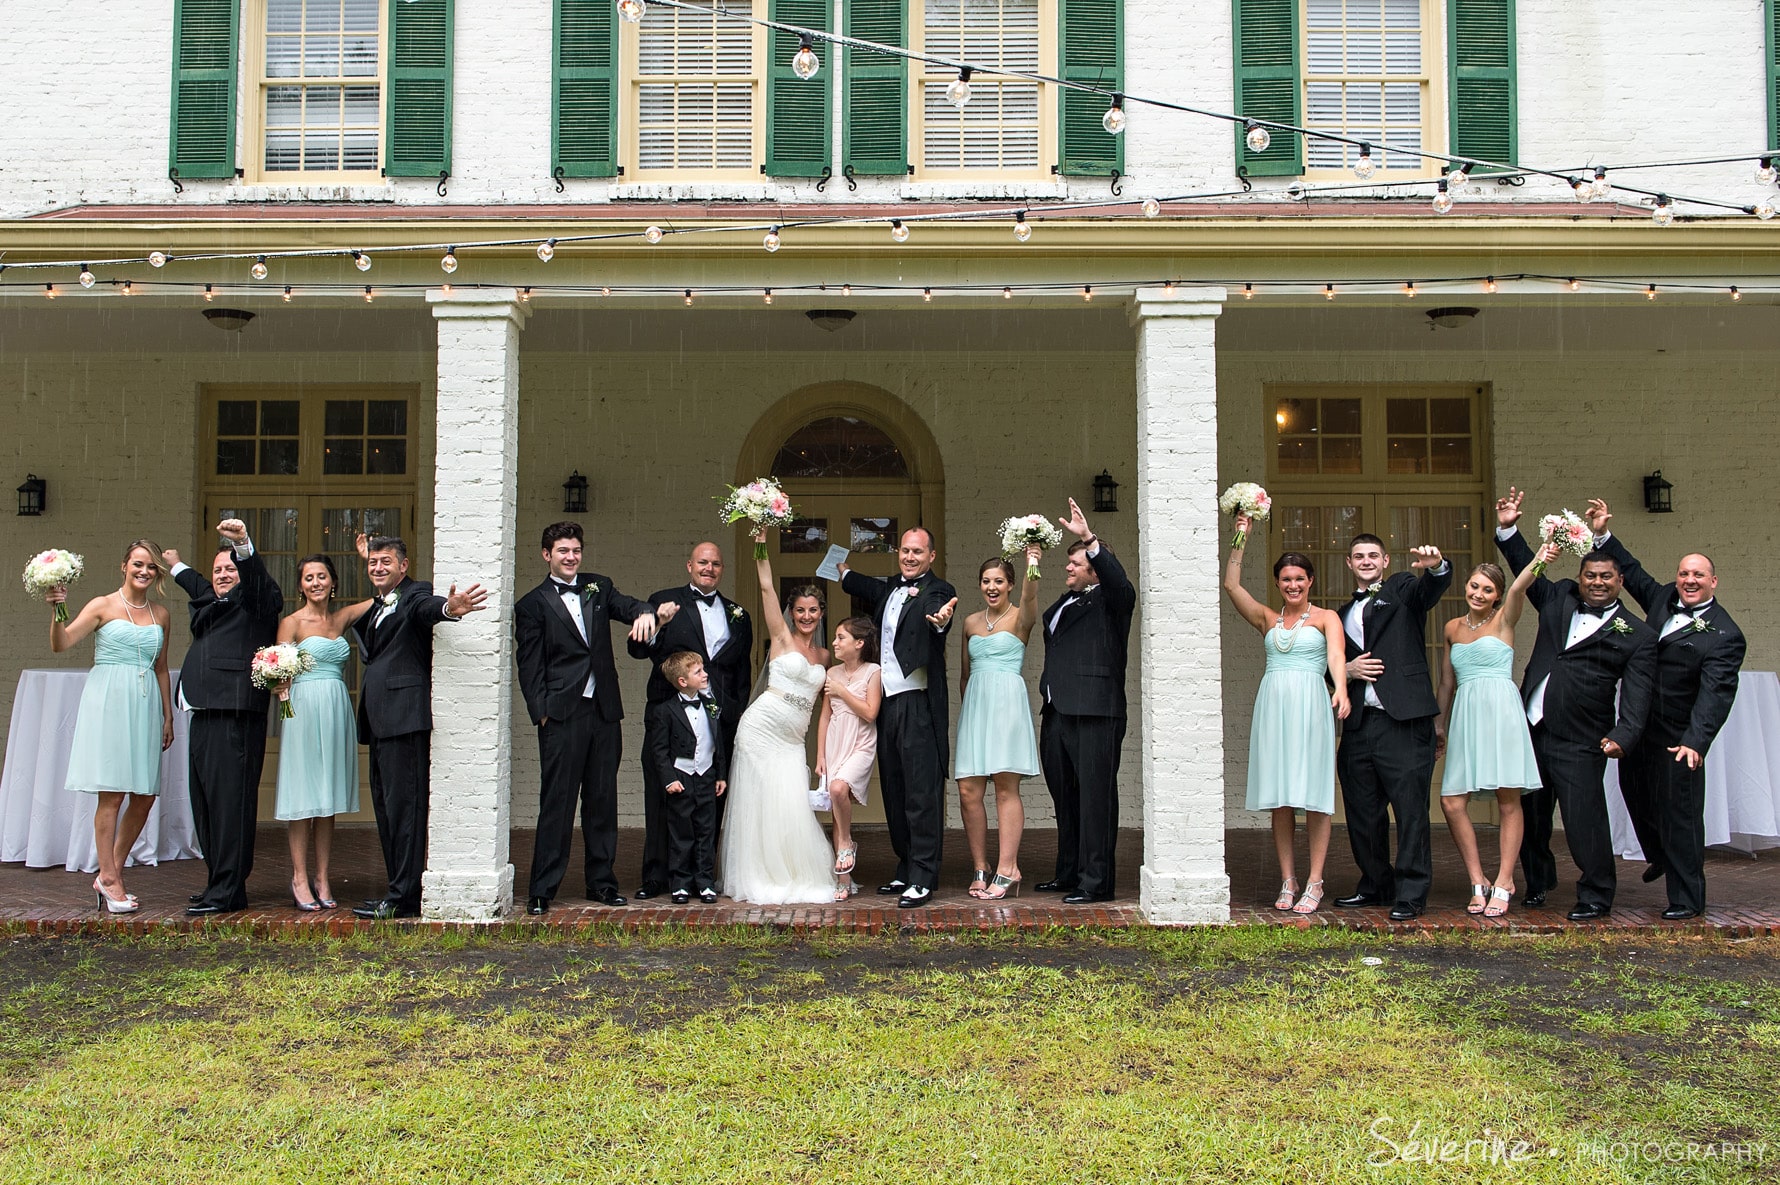 Bridal Party with teal dresses